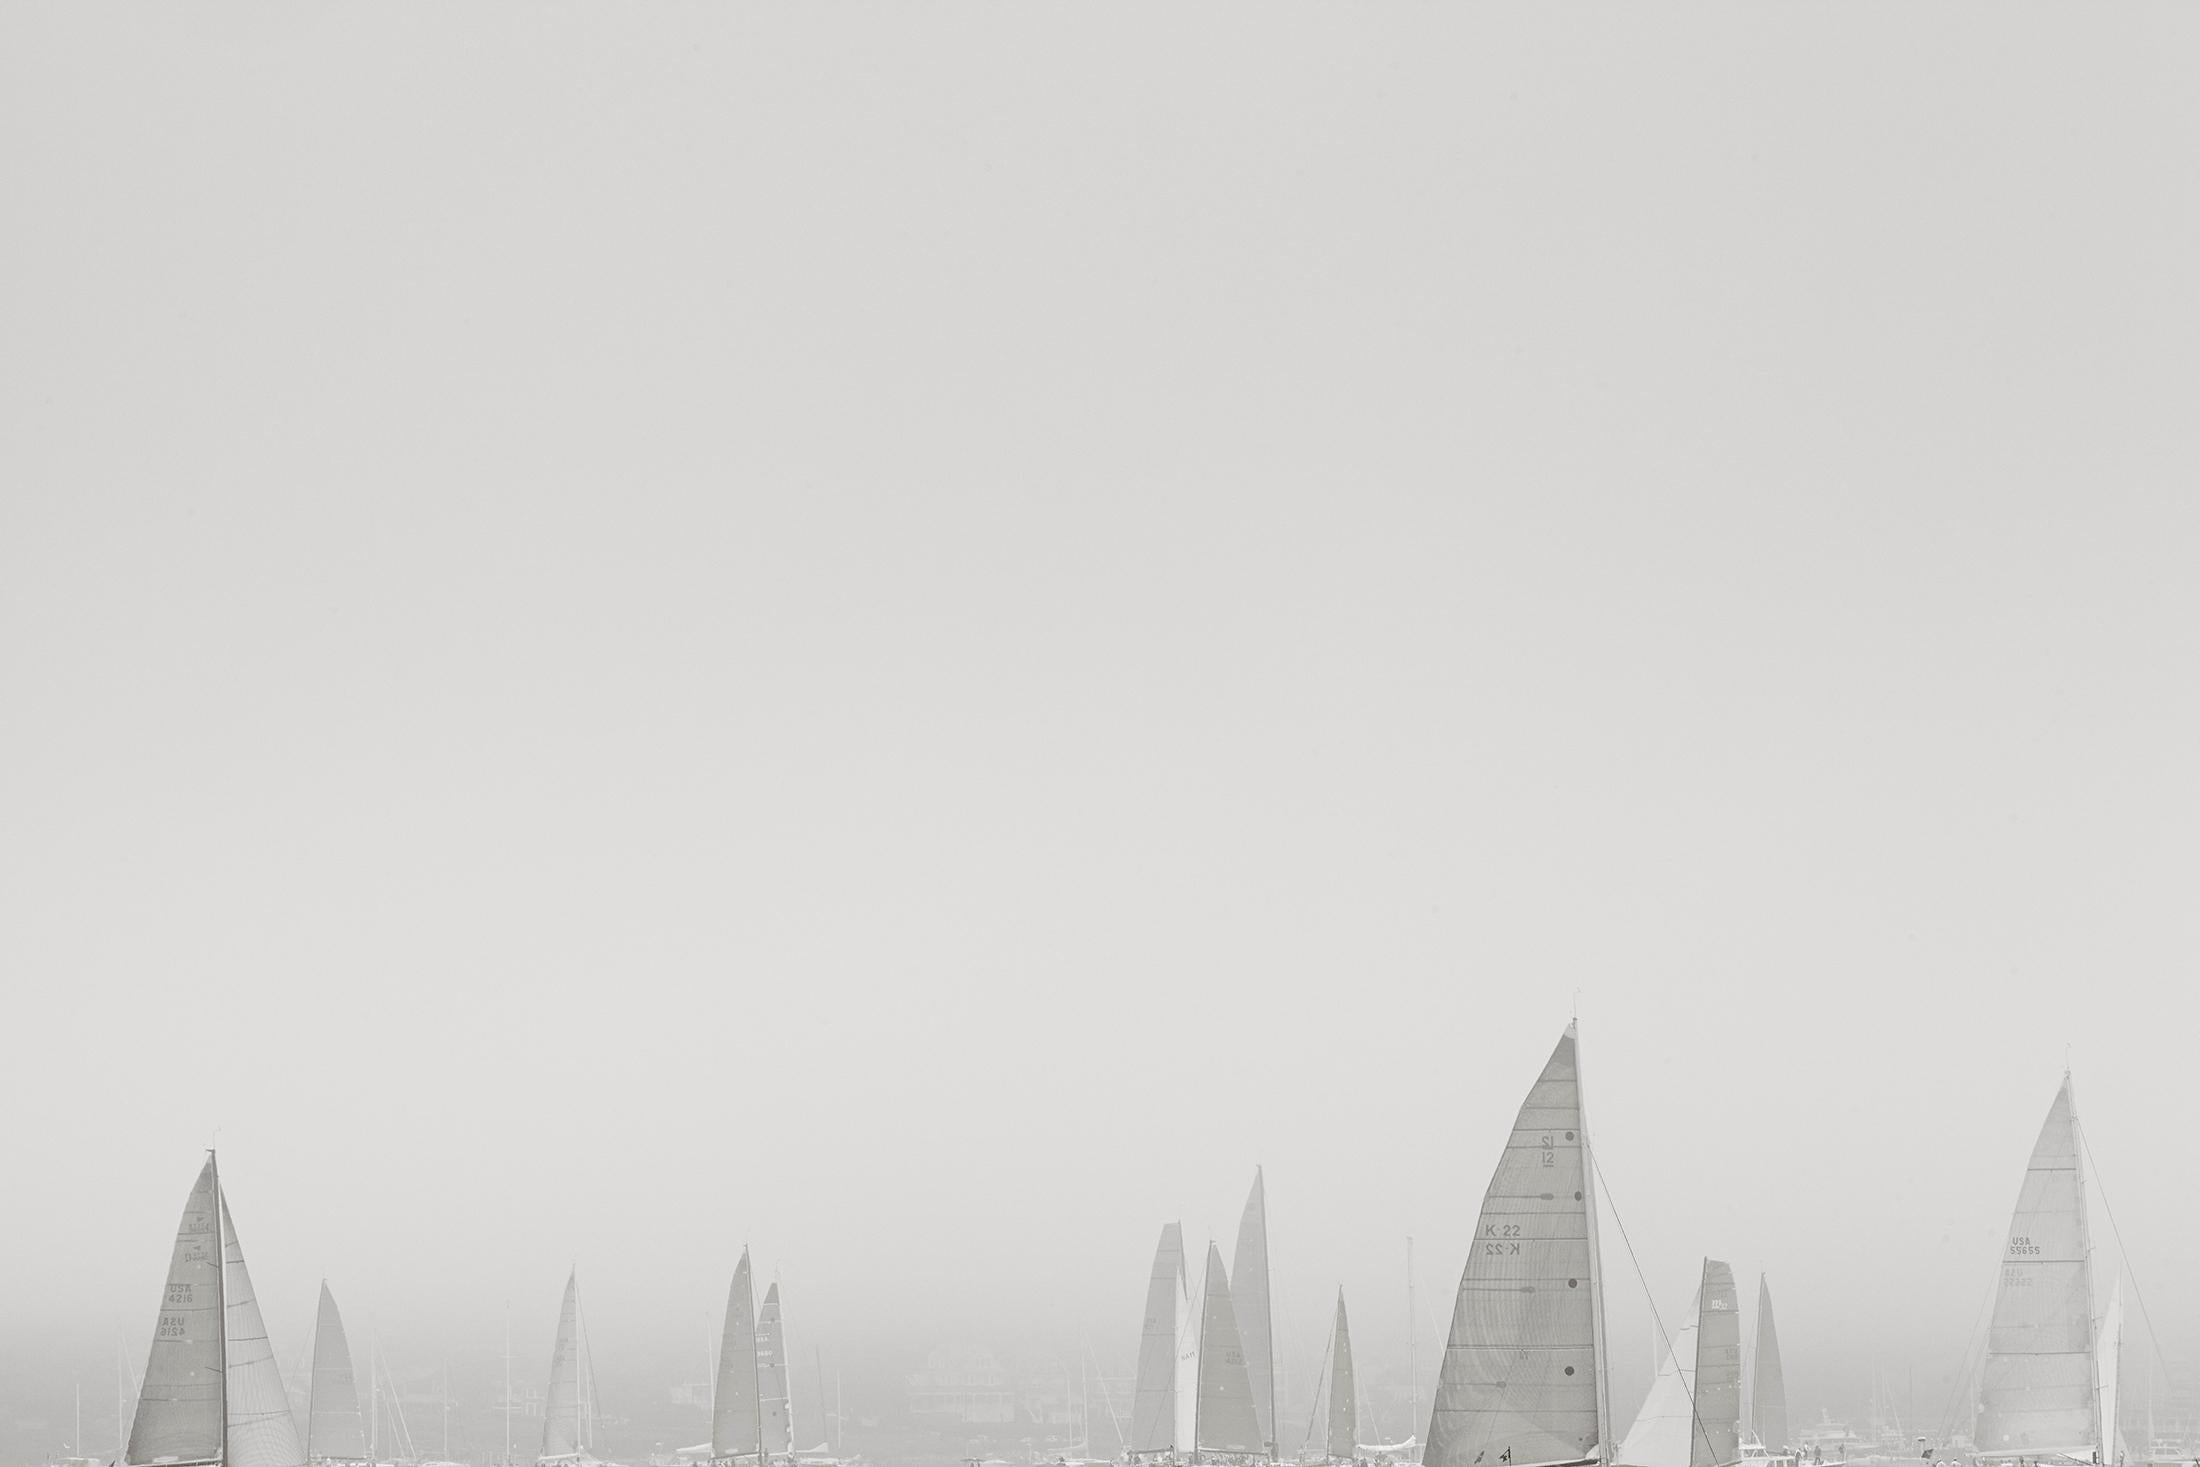 Drew Doggett Portrait Photograph - World-Class Yachts in Fog at the Regatta, Iconic Black and White Print